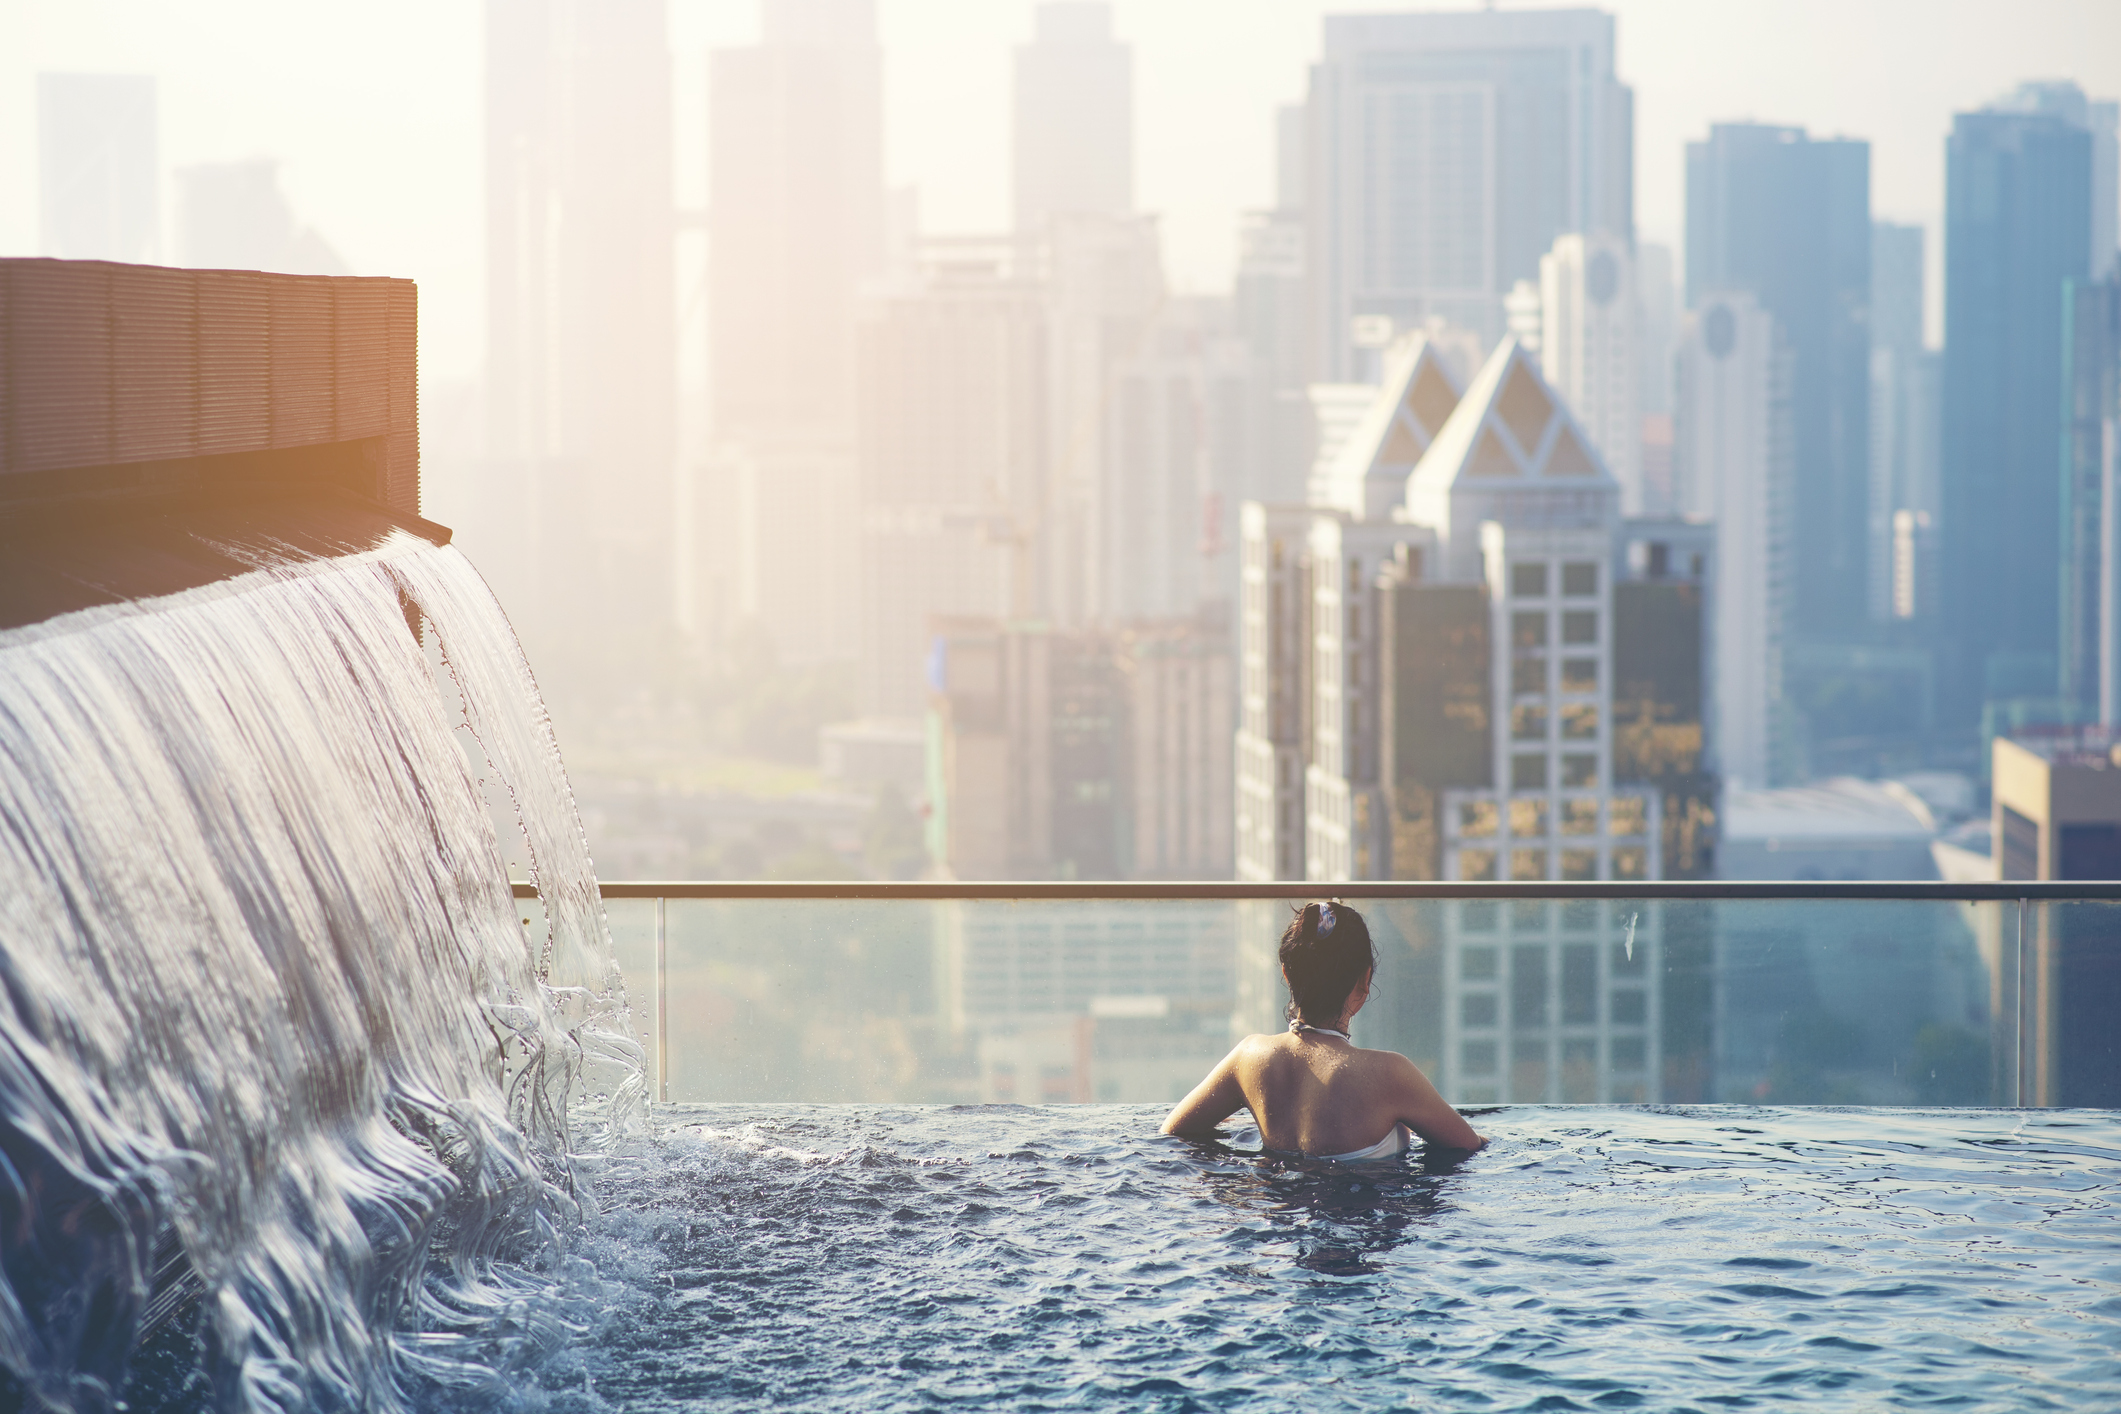 A traveler enjoys the view over the city from a rooftop pool with waterfall